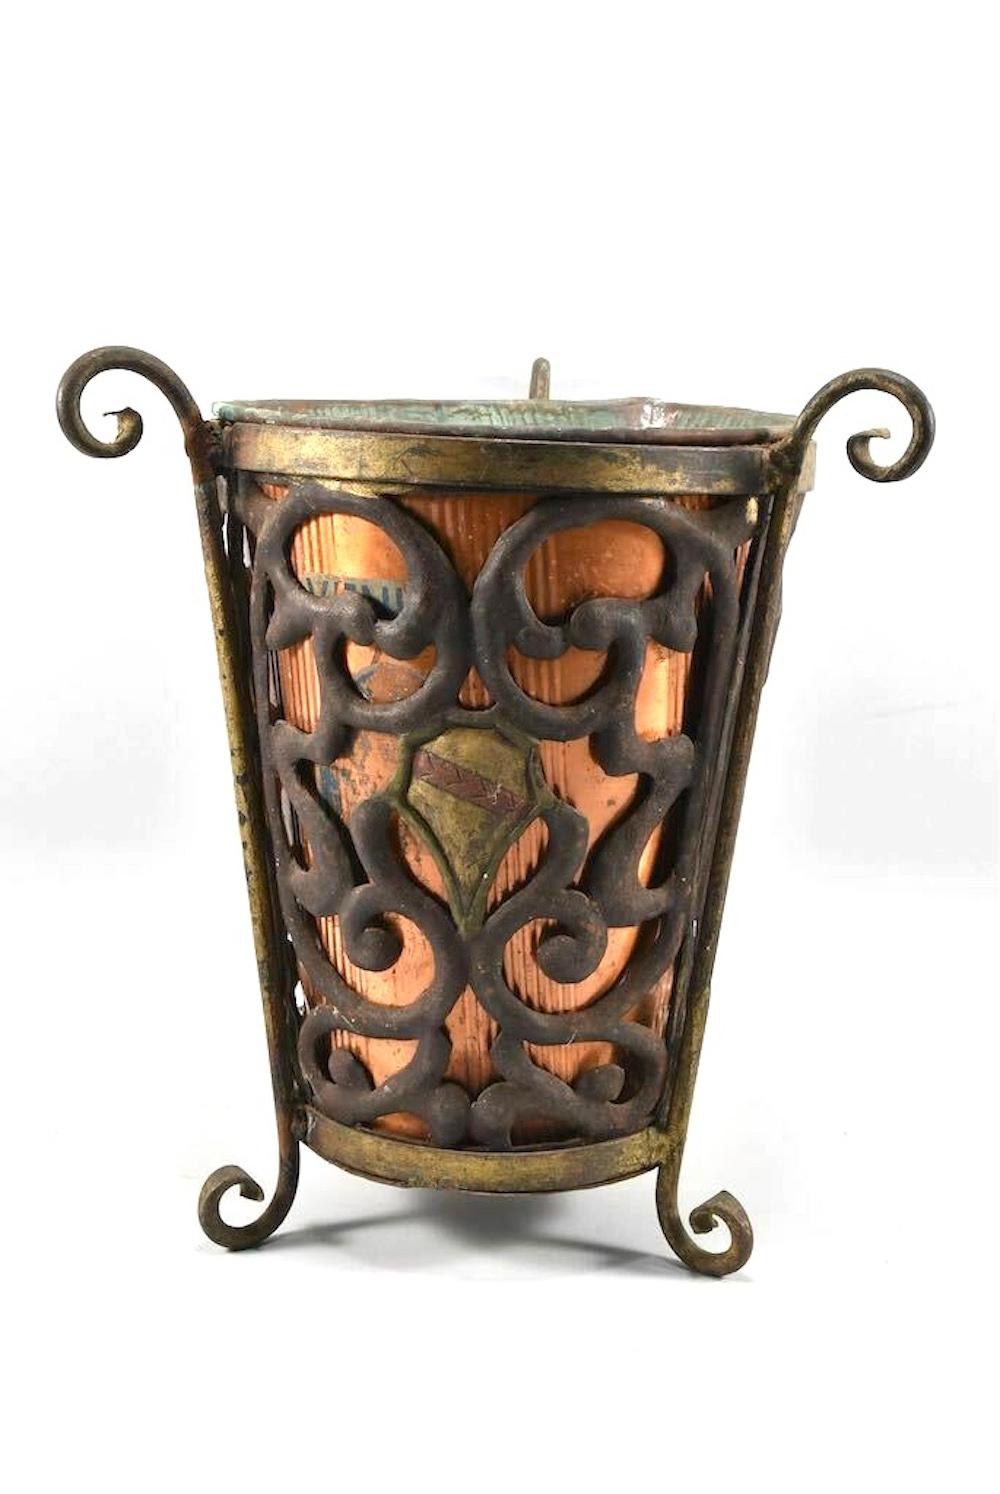 Beautiful Austrian paper or waste basket - trash can. Perfect for your office or also to use as an umbrella or walking stick stand. The piece is in good used antique condition with patina. The patina only adds to its beauty. Found at an estate sale